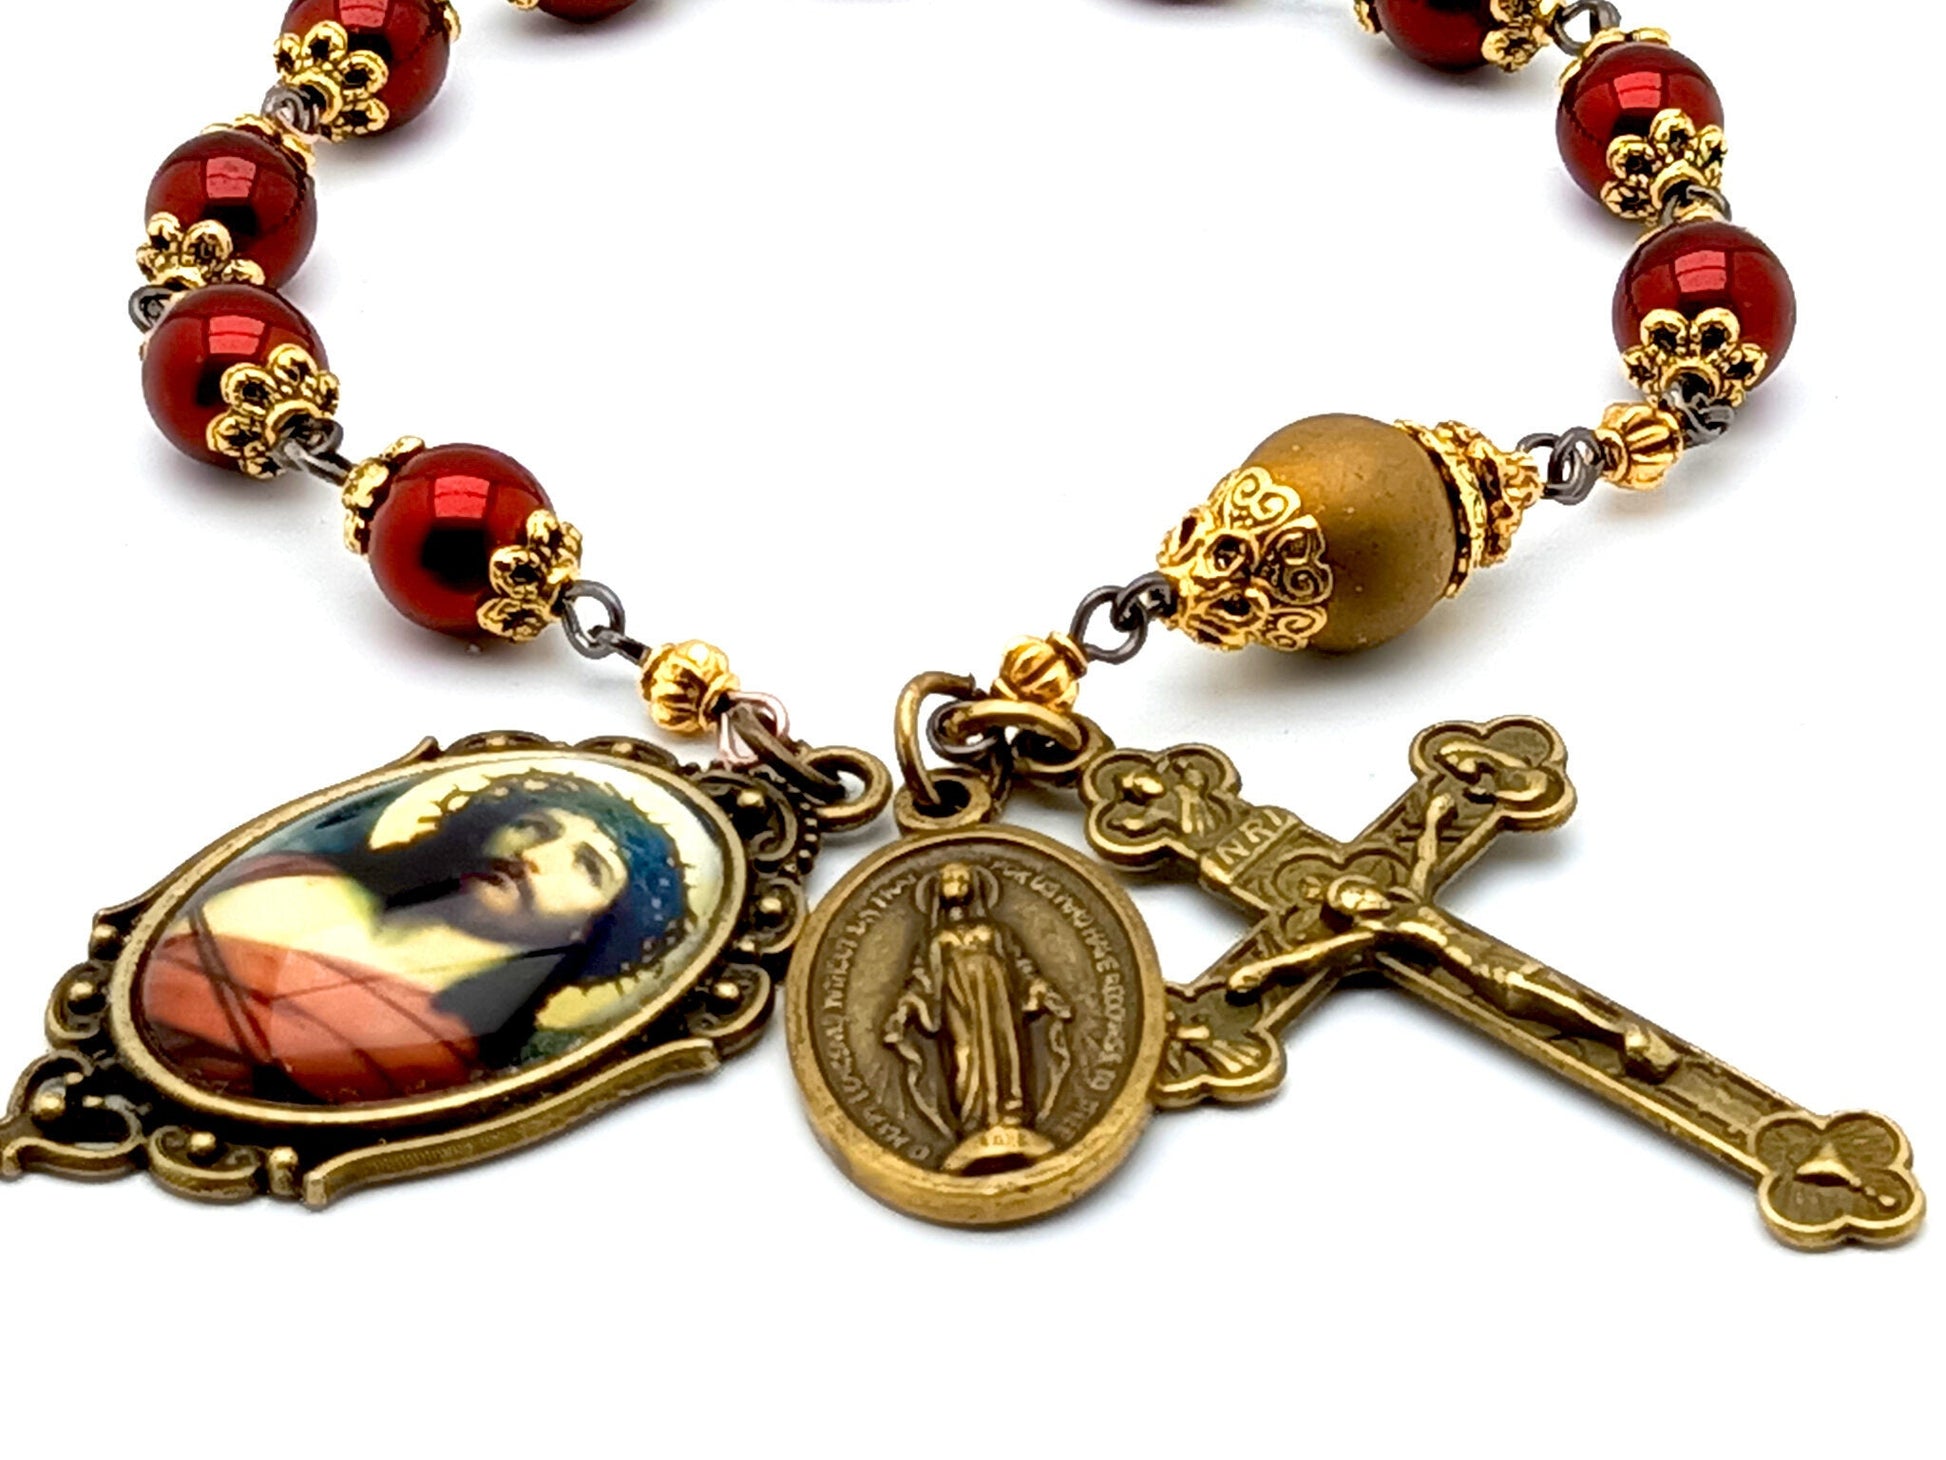 Crown of Thorns unique rosary beads single decade rosary with red hematite beads golden accessories, bronze crucifix, miraculous medal and picture centre medal.